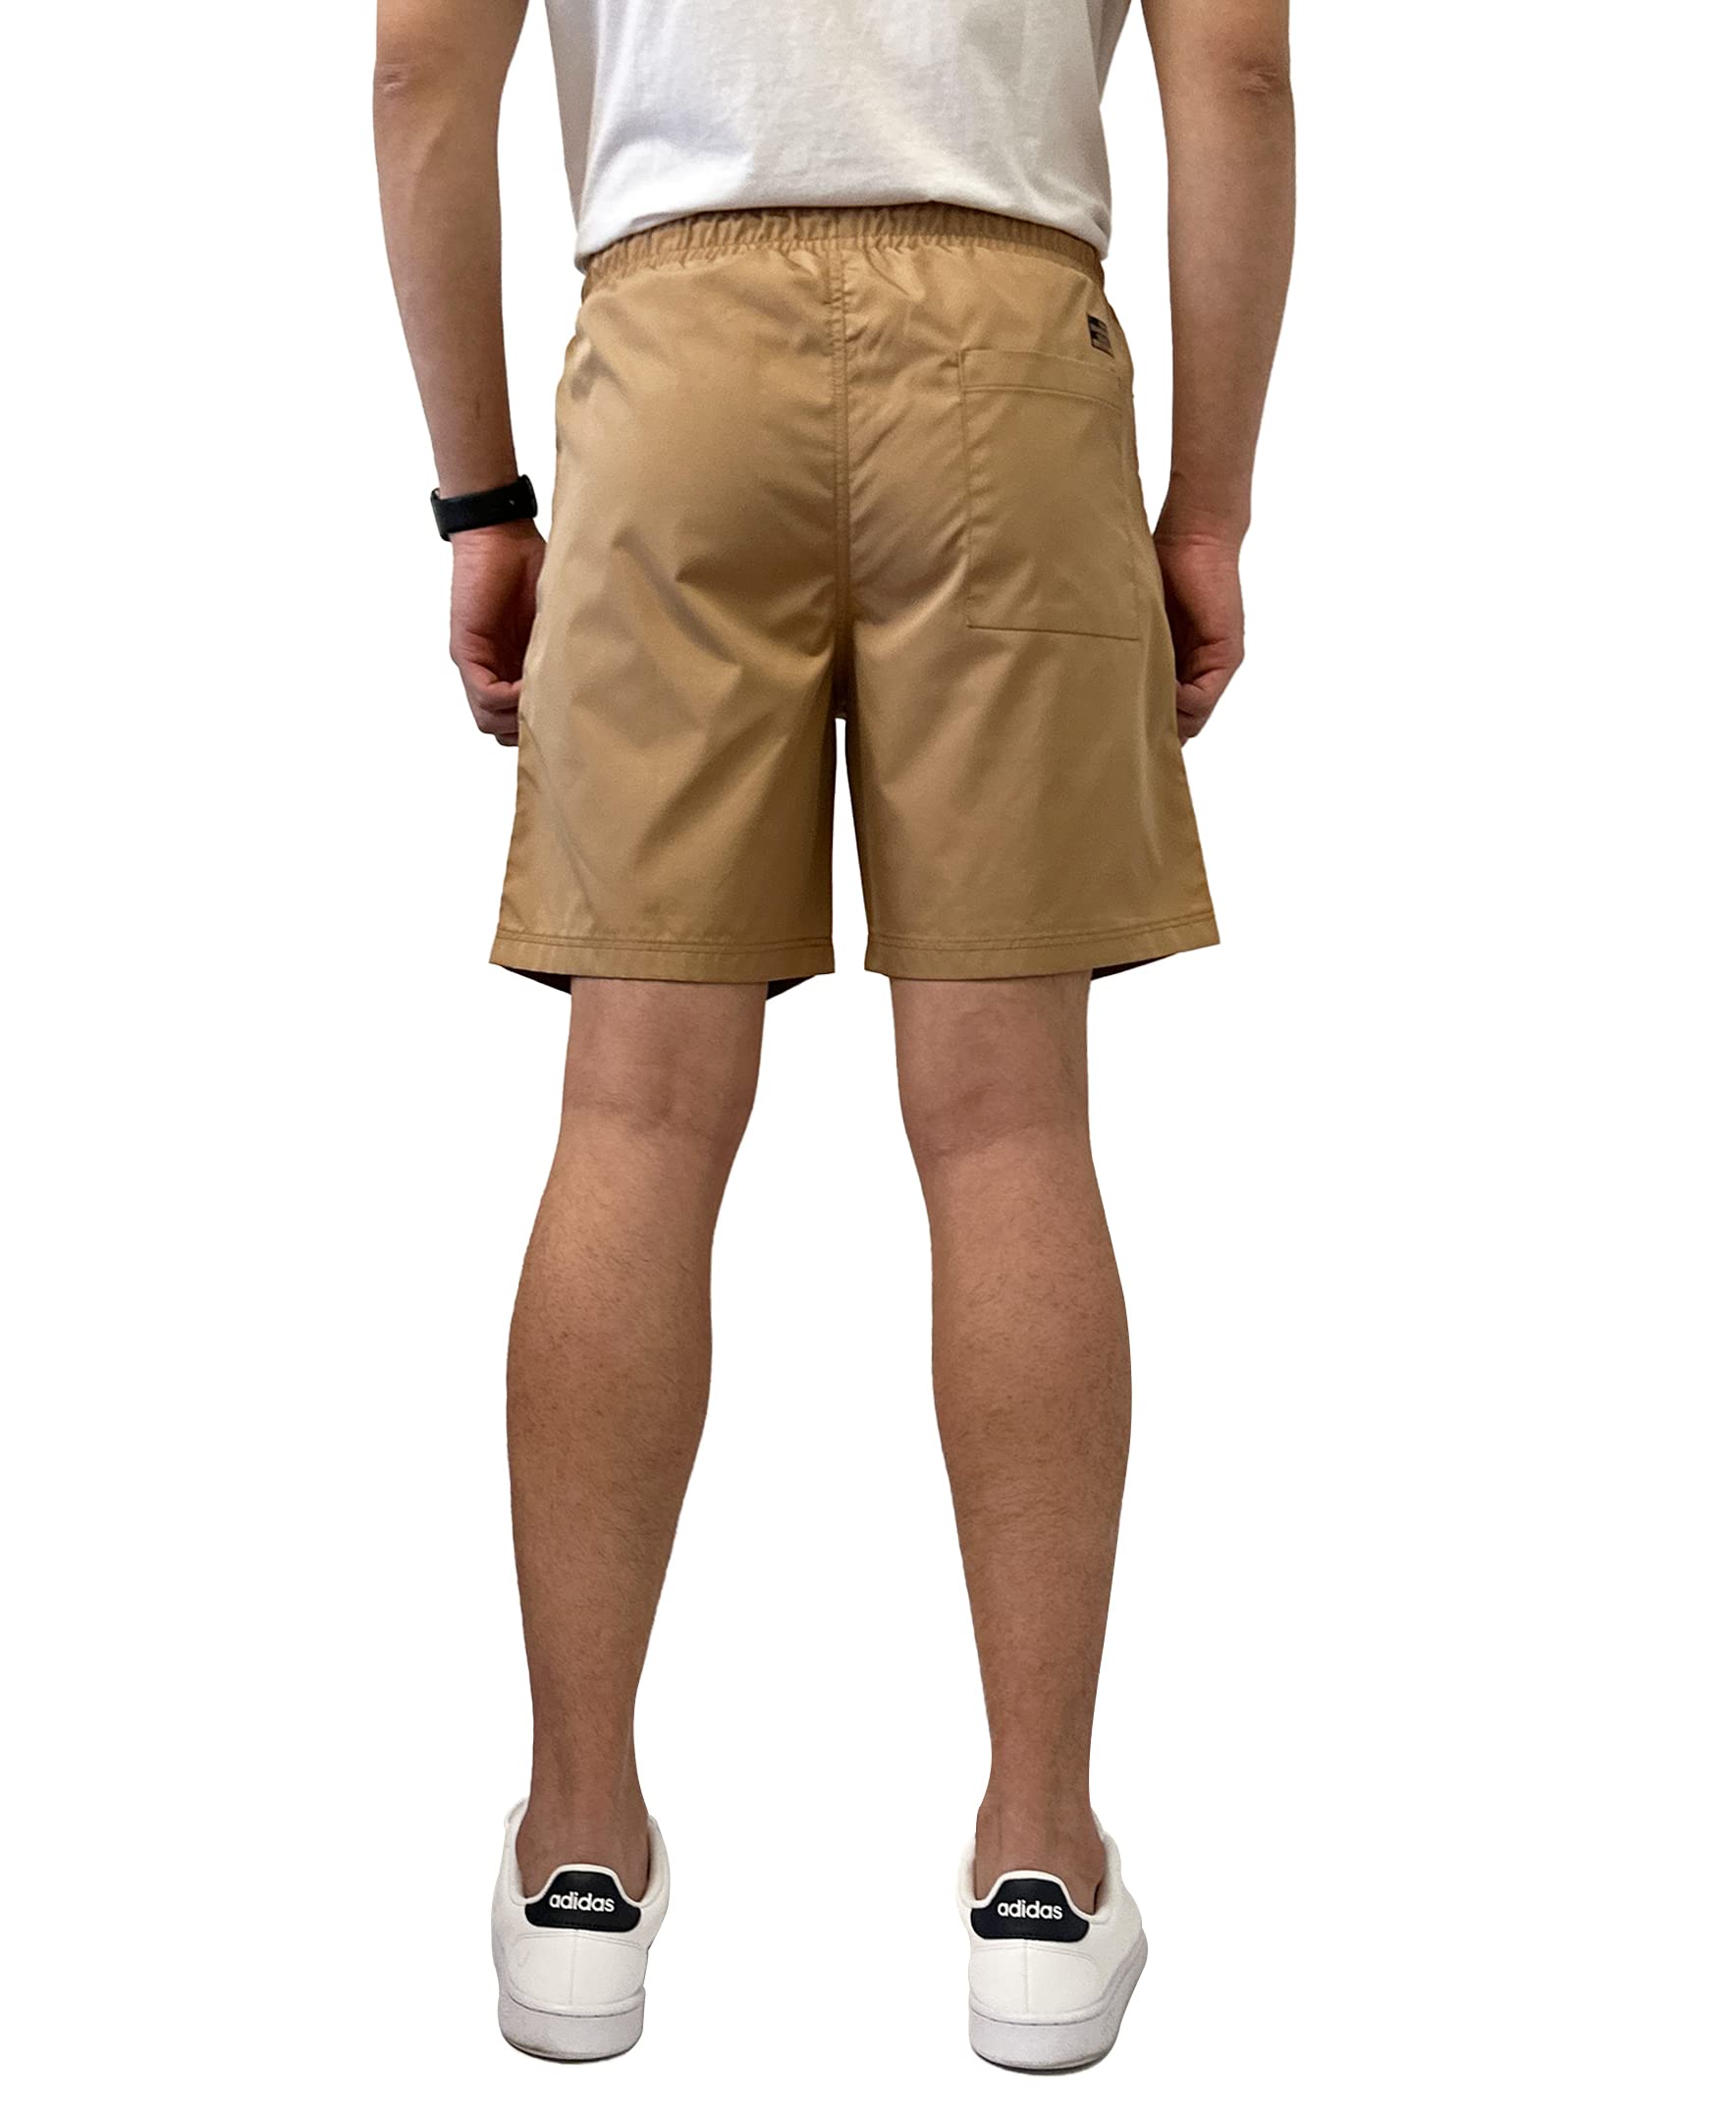 Southpole Men's Quick-Dry Water Resistant Nylon Shorts Inseam 7